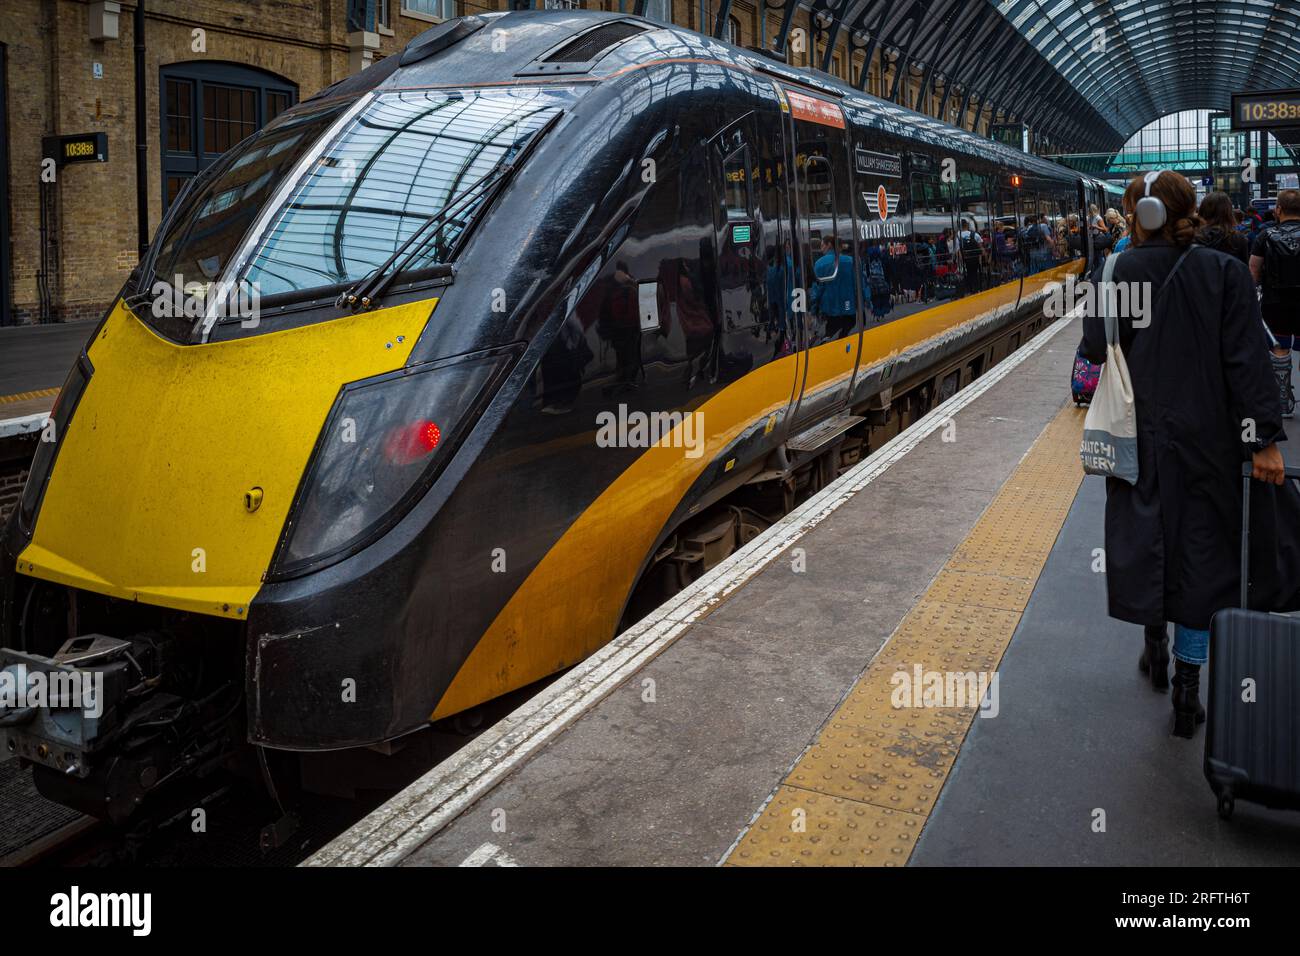 Grand Central Train at Kings Cross Station London. Grand Central Train at London's Kings Cross Station UK. A subsidiary of Arriva UK Trains. Stock Photo